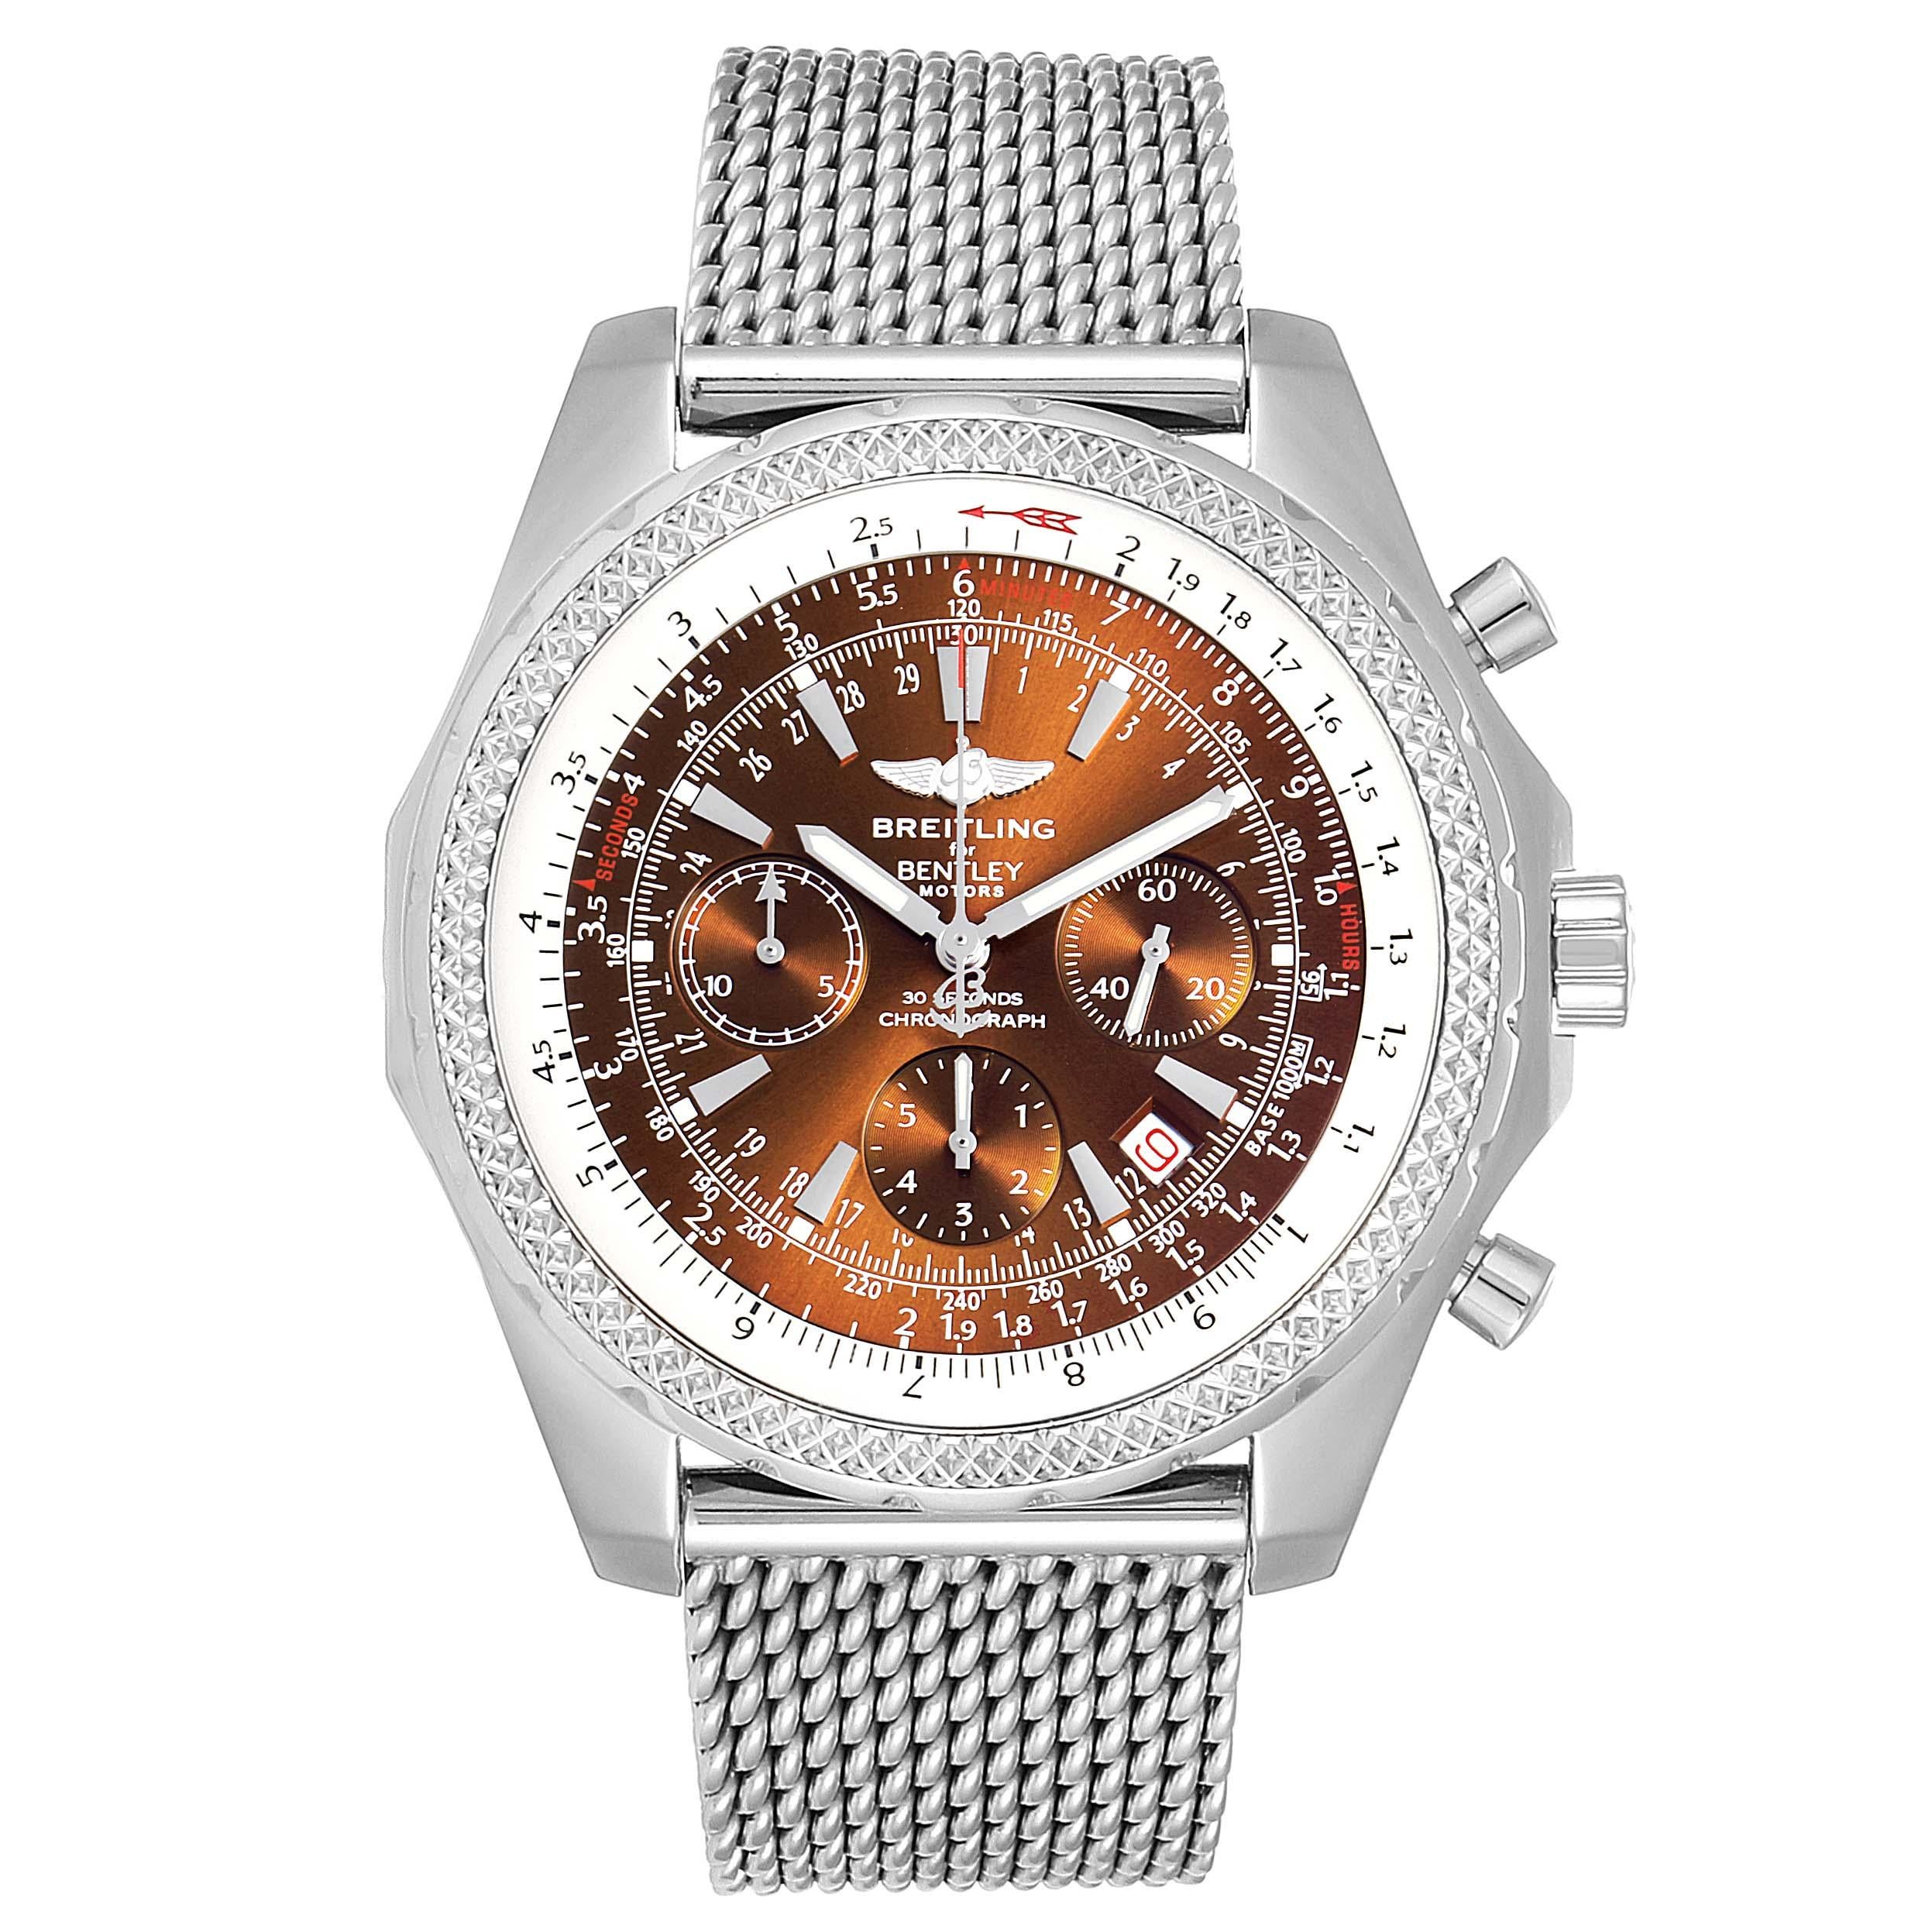 Breitling Bentley Motors Bronze Dial Steel Mens Watch A25362 Box Papers. Automatic self-winding officially certified chronometer movement. Chronograph function. Stainless steel case 49 mm in diameter. Stainless steel screwed-down crown and pushers.